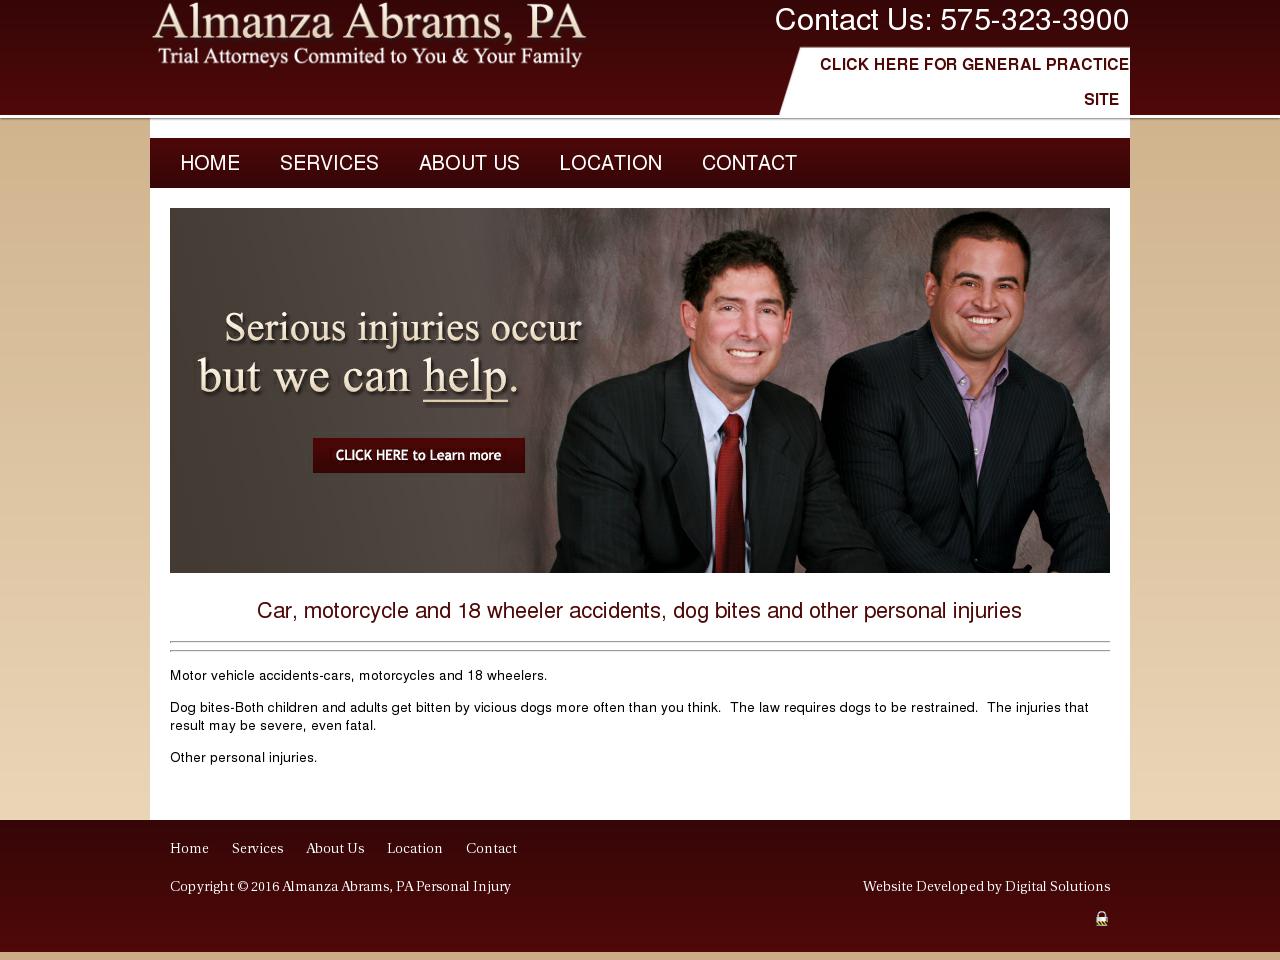 Law Offices of Almanza Abrams, P.A. - Las Cruces NM Lawyers